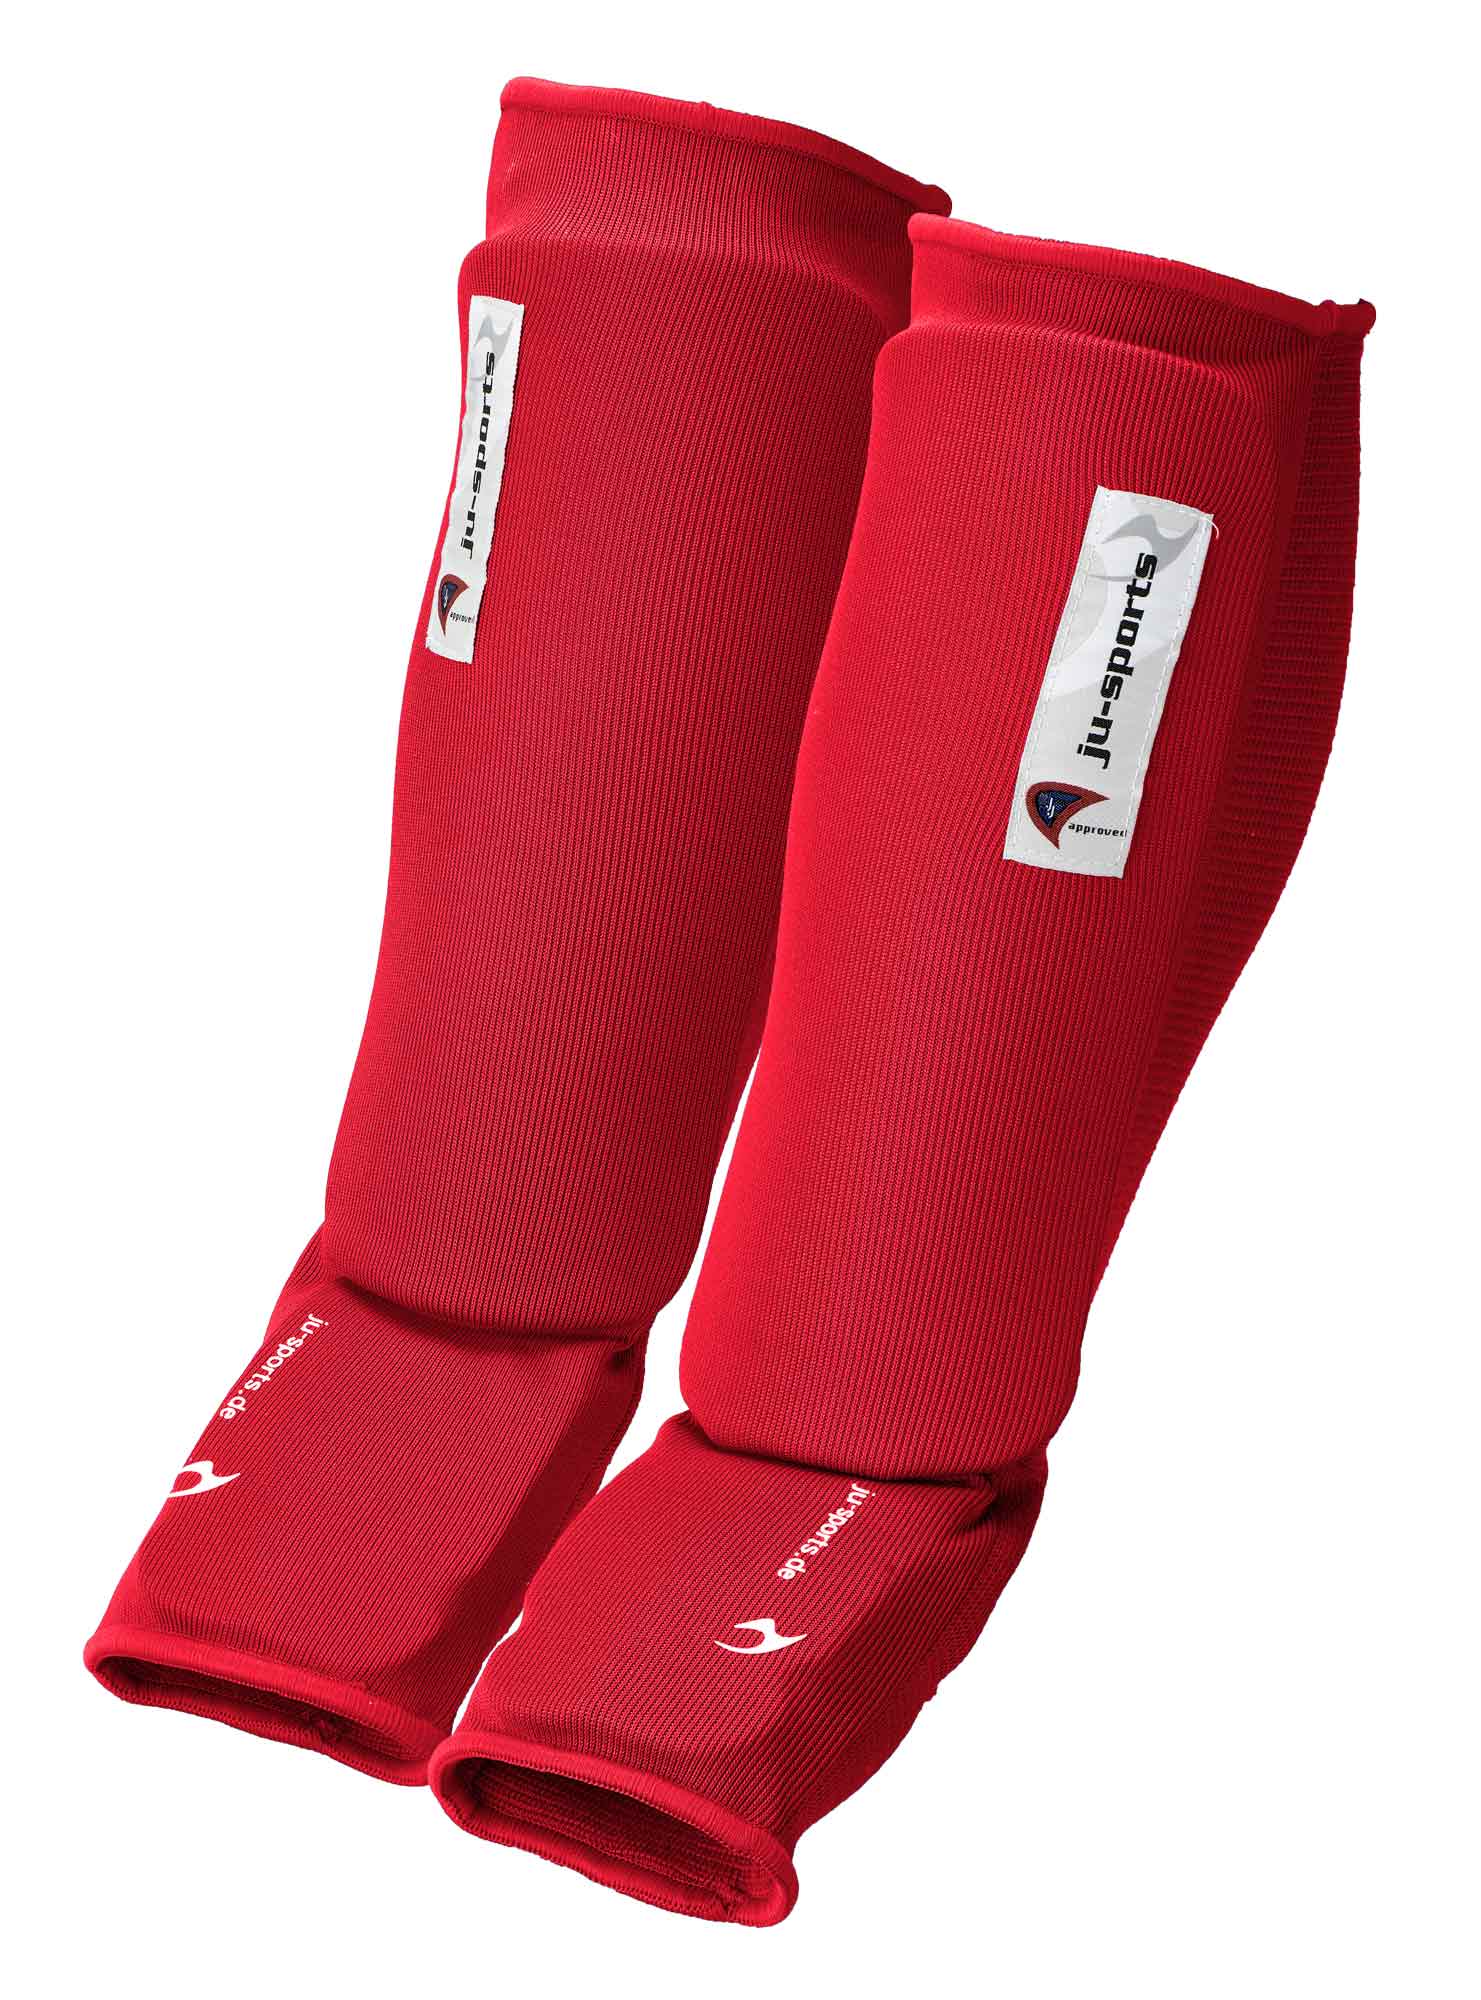 Ju-Sports Shin & Instep Protector Red